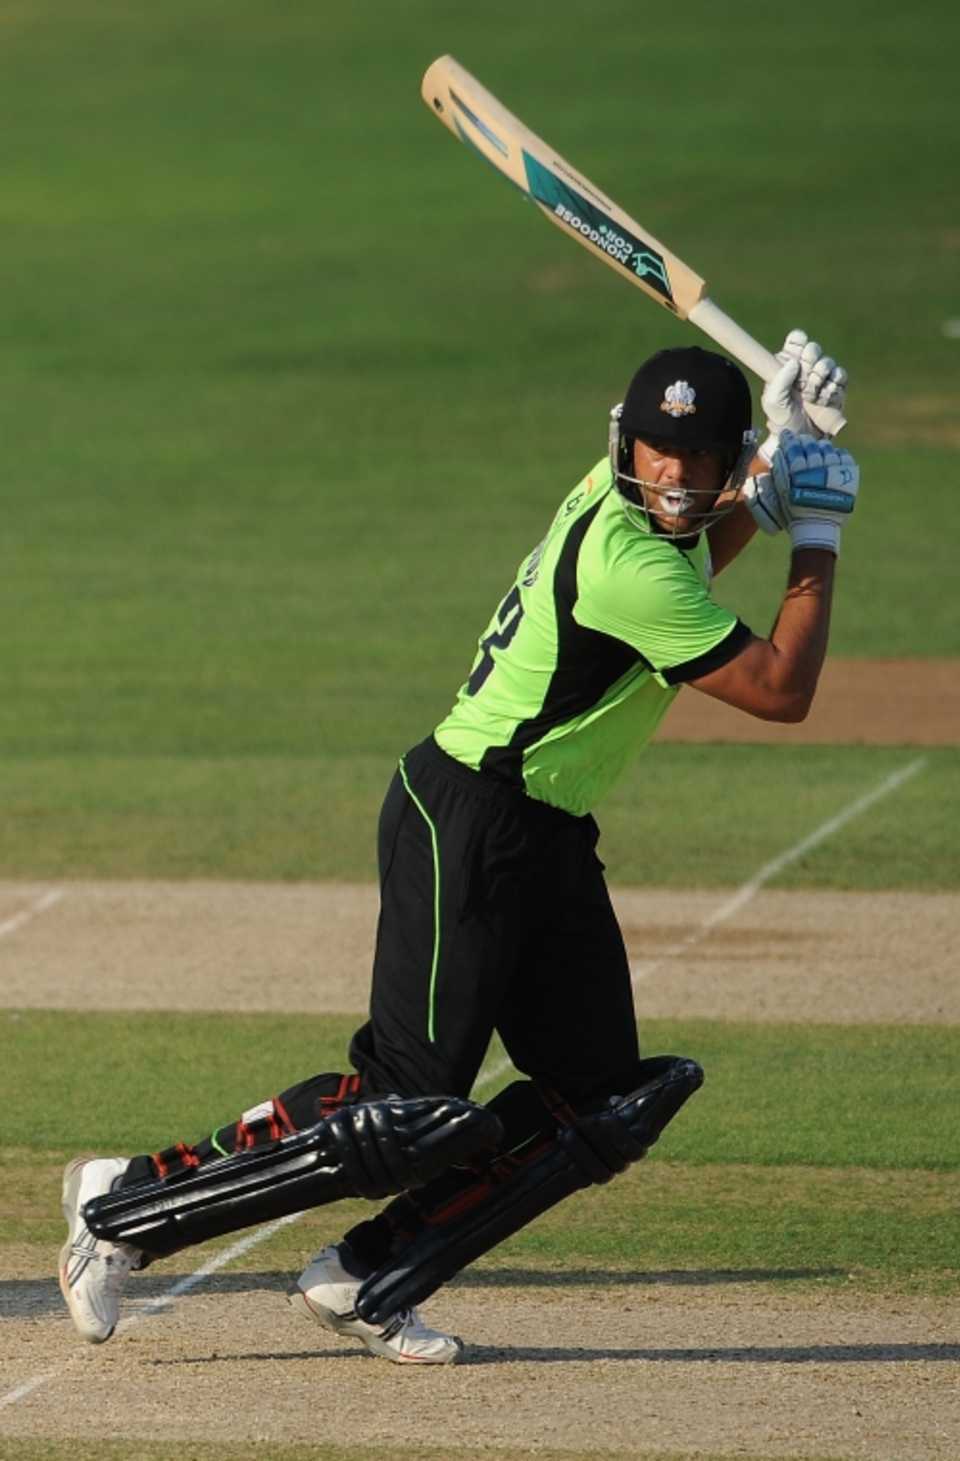 Andrew Symonds top-scored with 63 from 33 balls to set up an 11-run win for Surrey